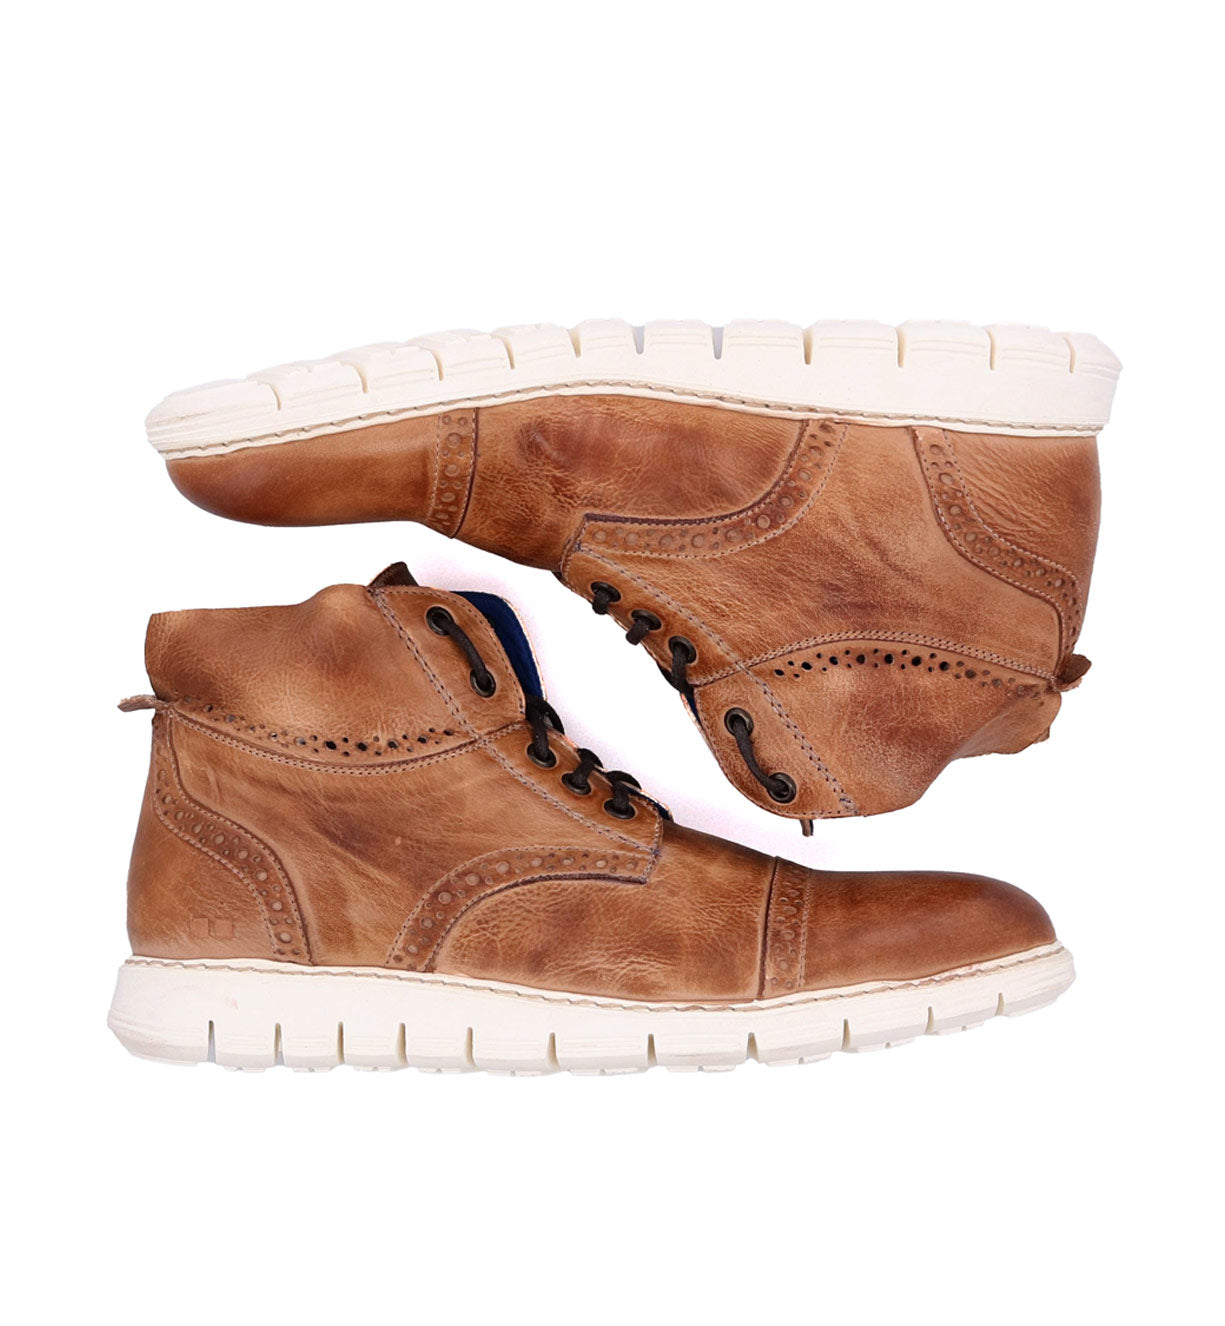 A pair of men's Bed Stu Bowery II brown leather boots.